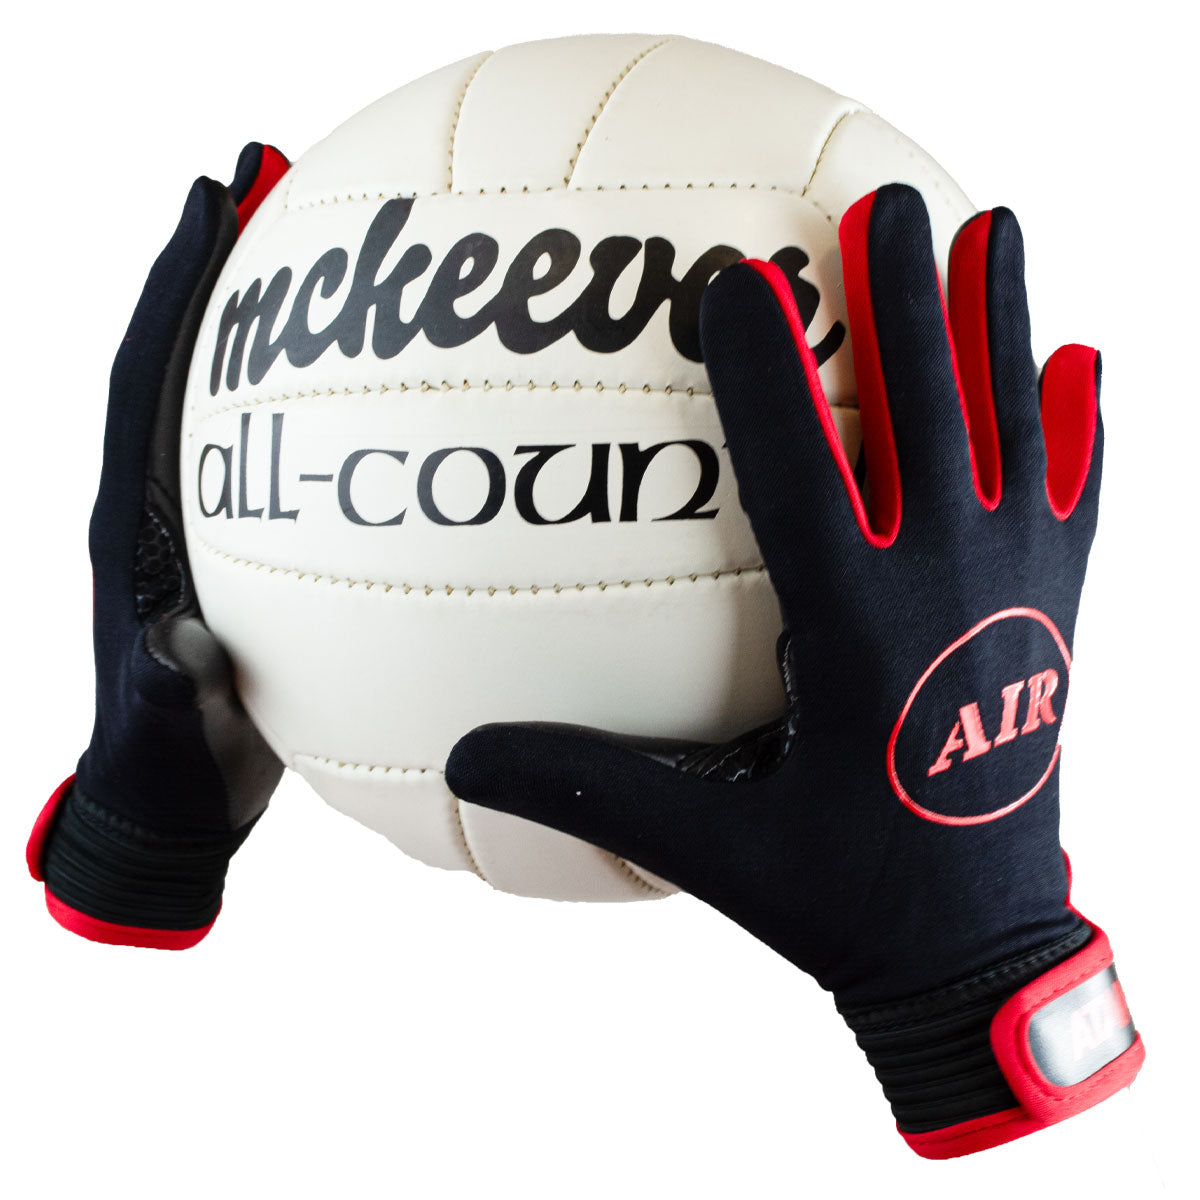 Atak Air Gaelic Gloves - Youth - Red